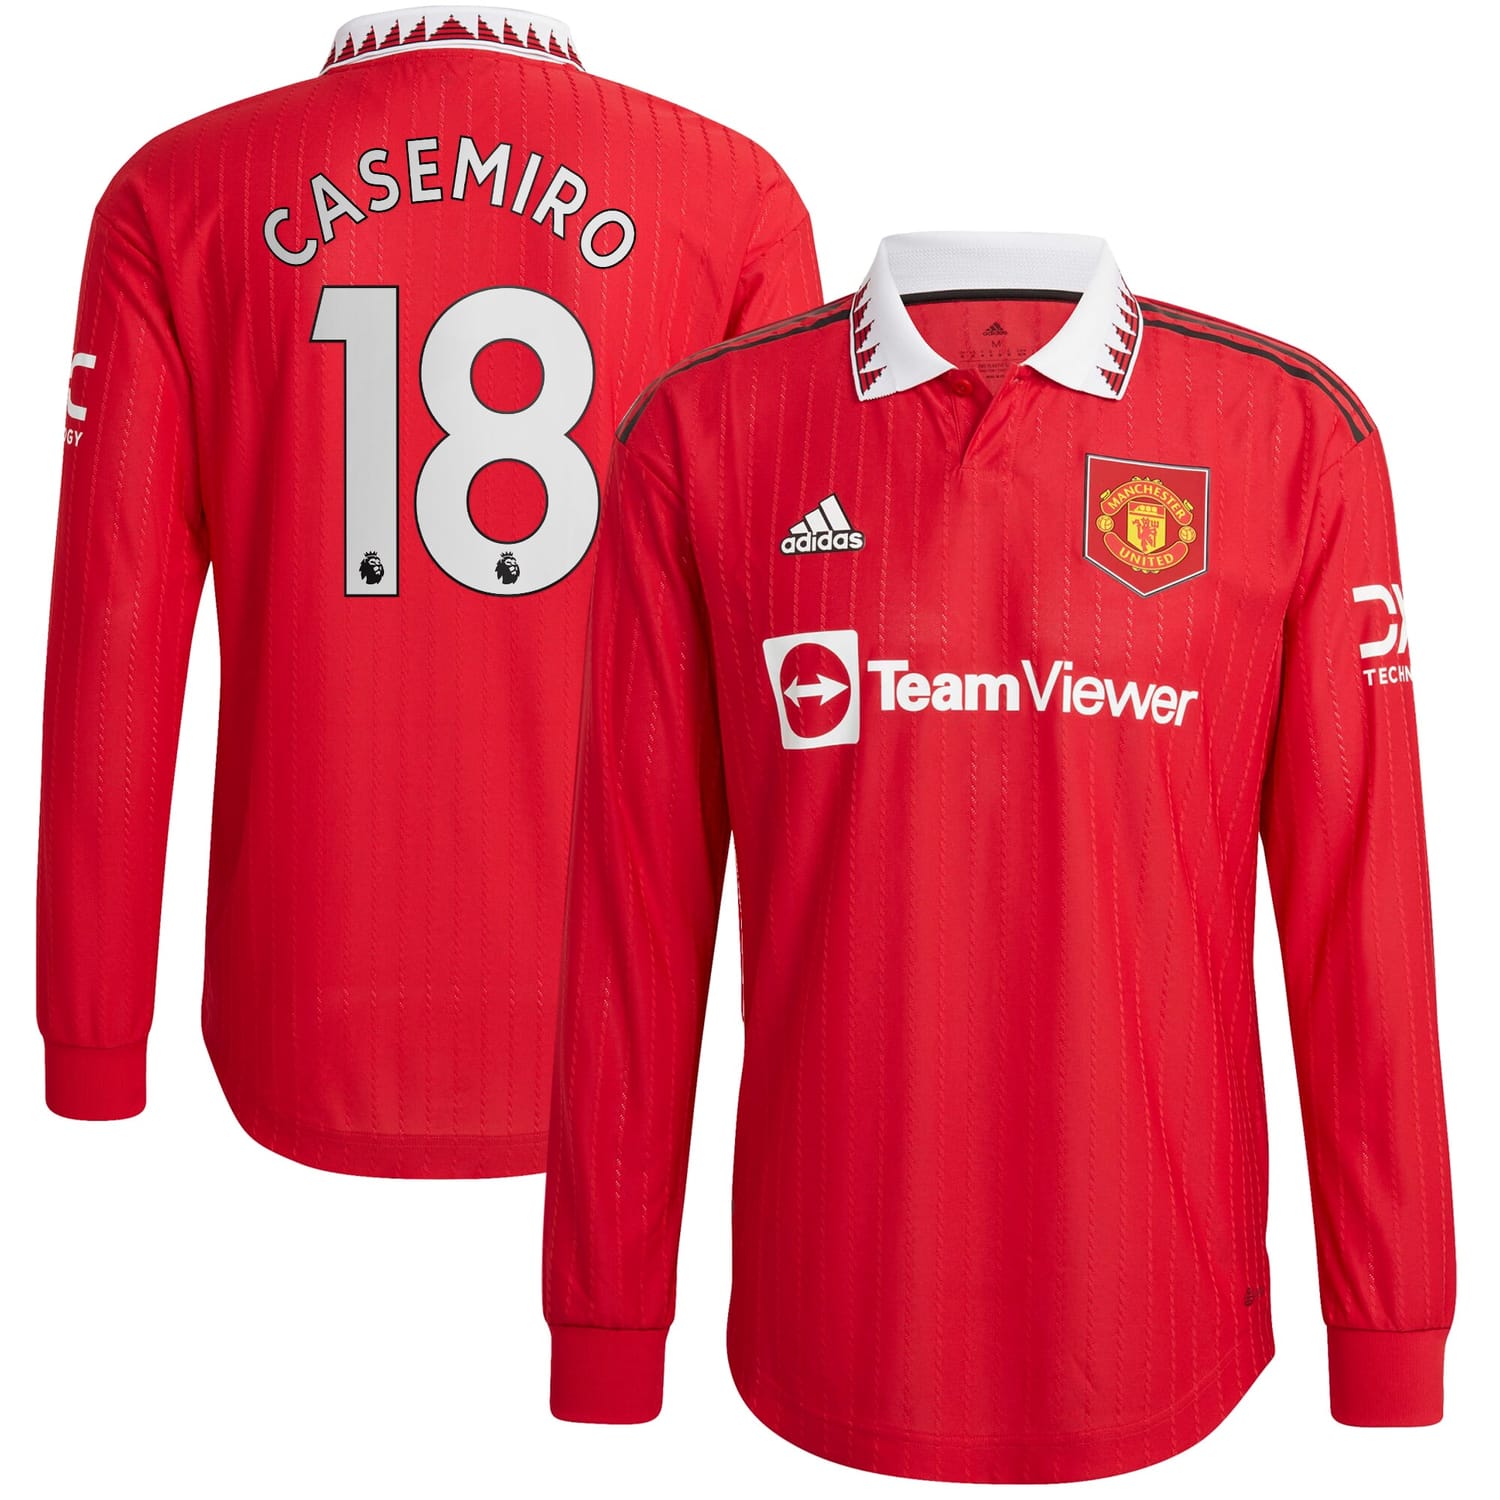 Premier League Manchester United Home Jersey Shirt Long Sleeve Red 2022-23 player Casemiro printing for Men